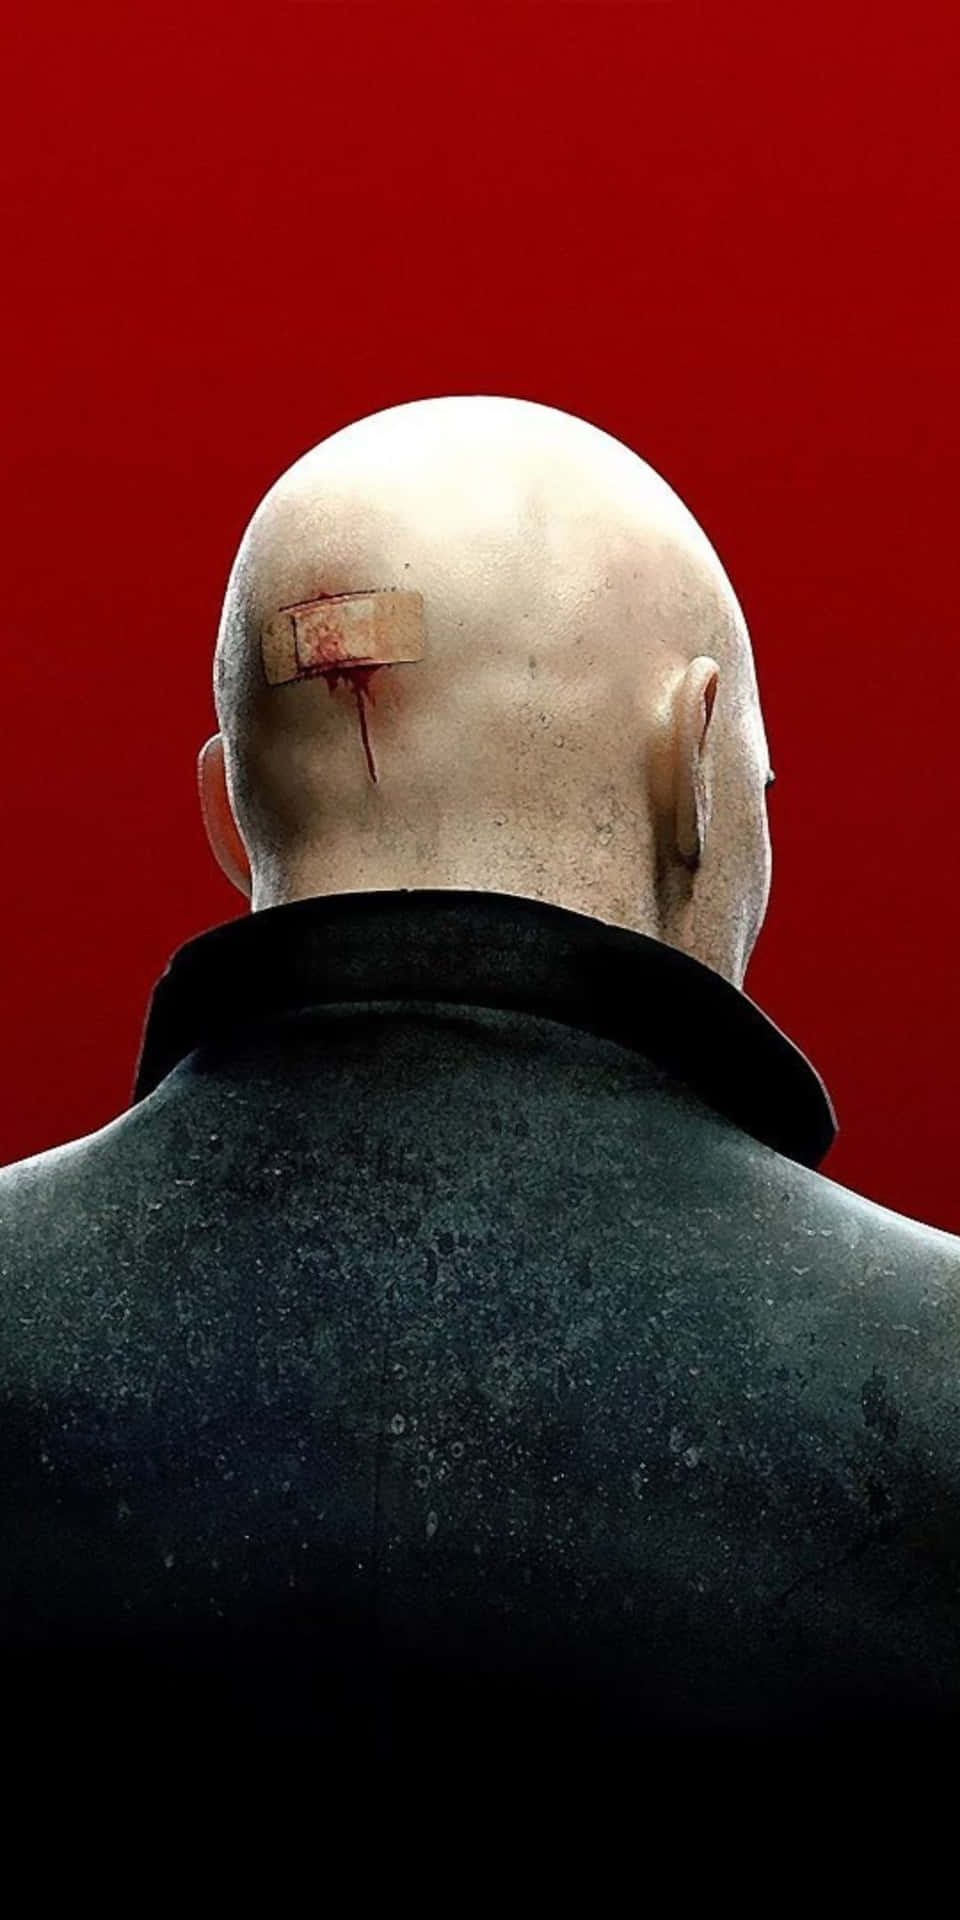 A Man With A Bald Head And Blood On His Head